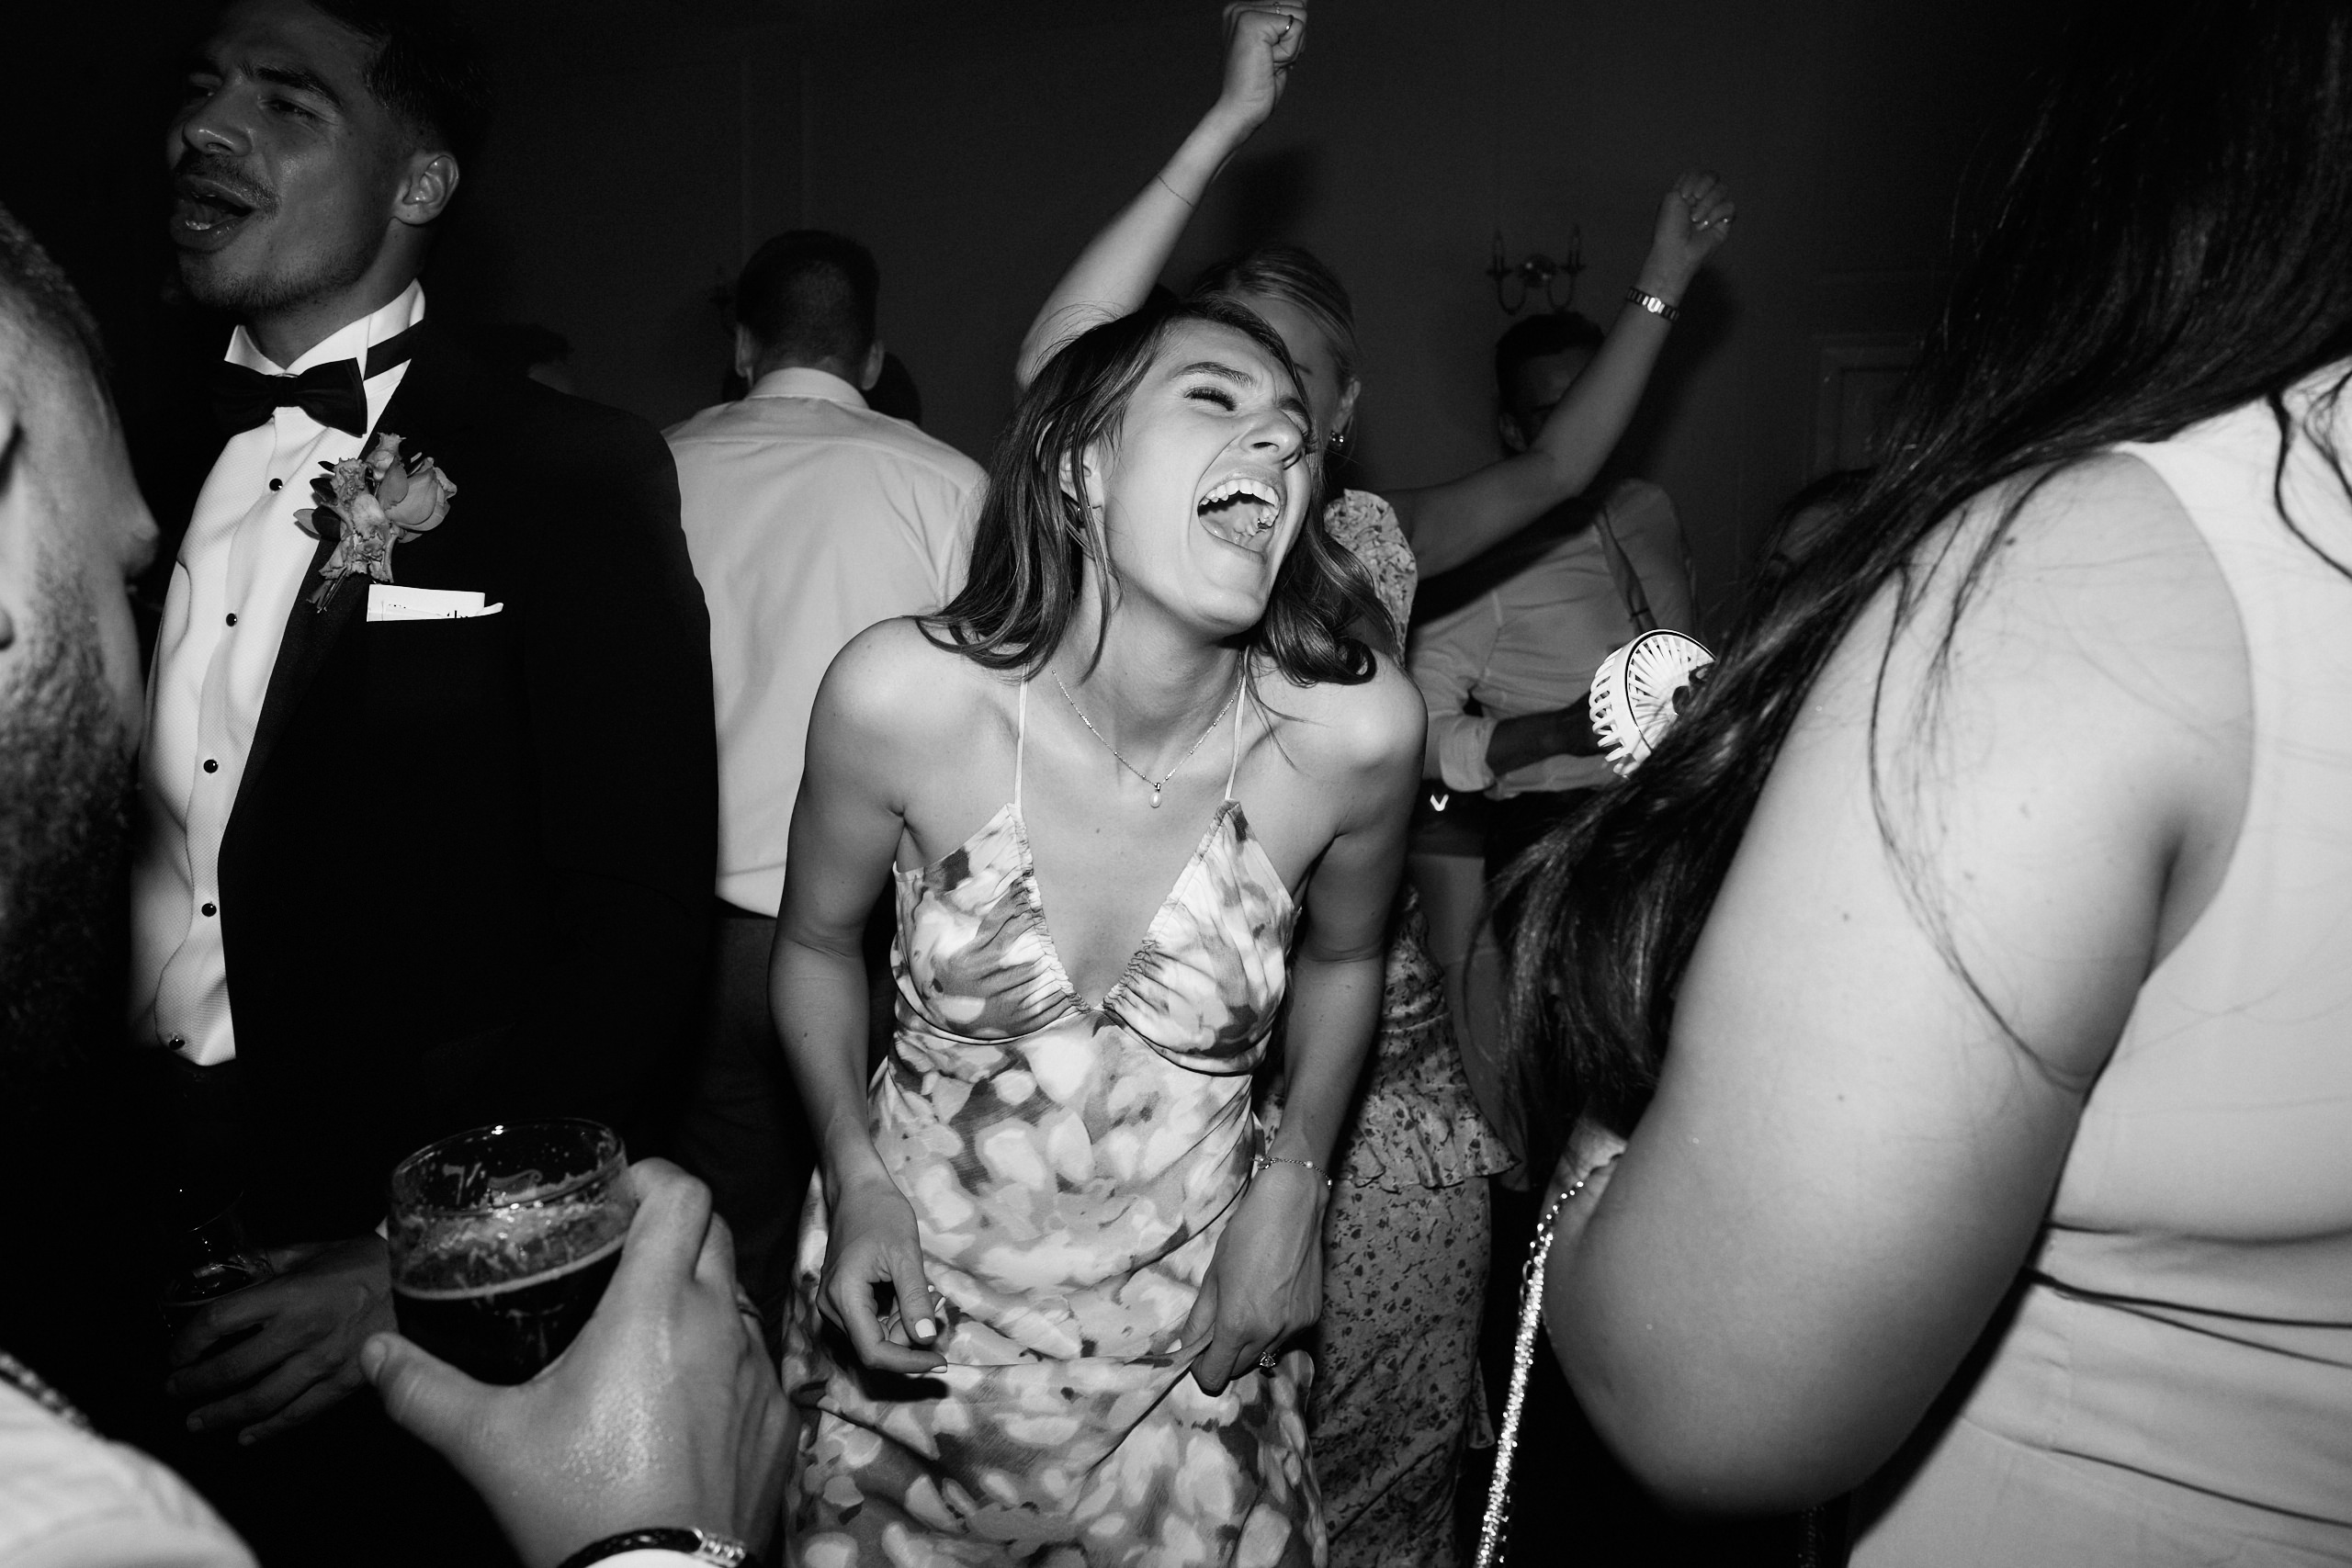 Black and white photo of a group of people dancing on the dance floor.